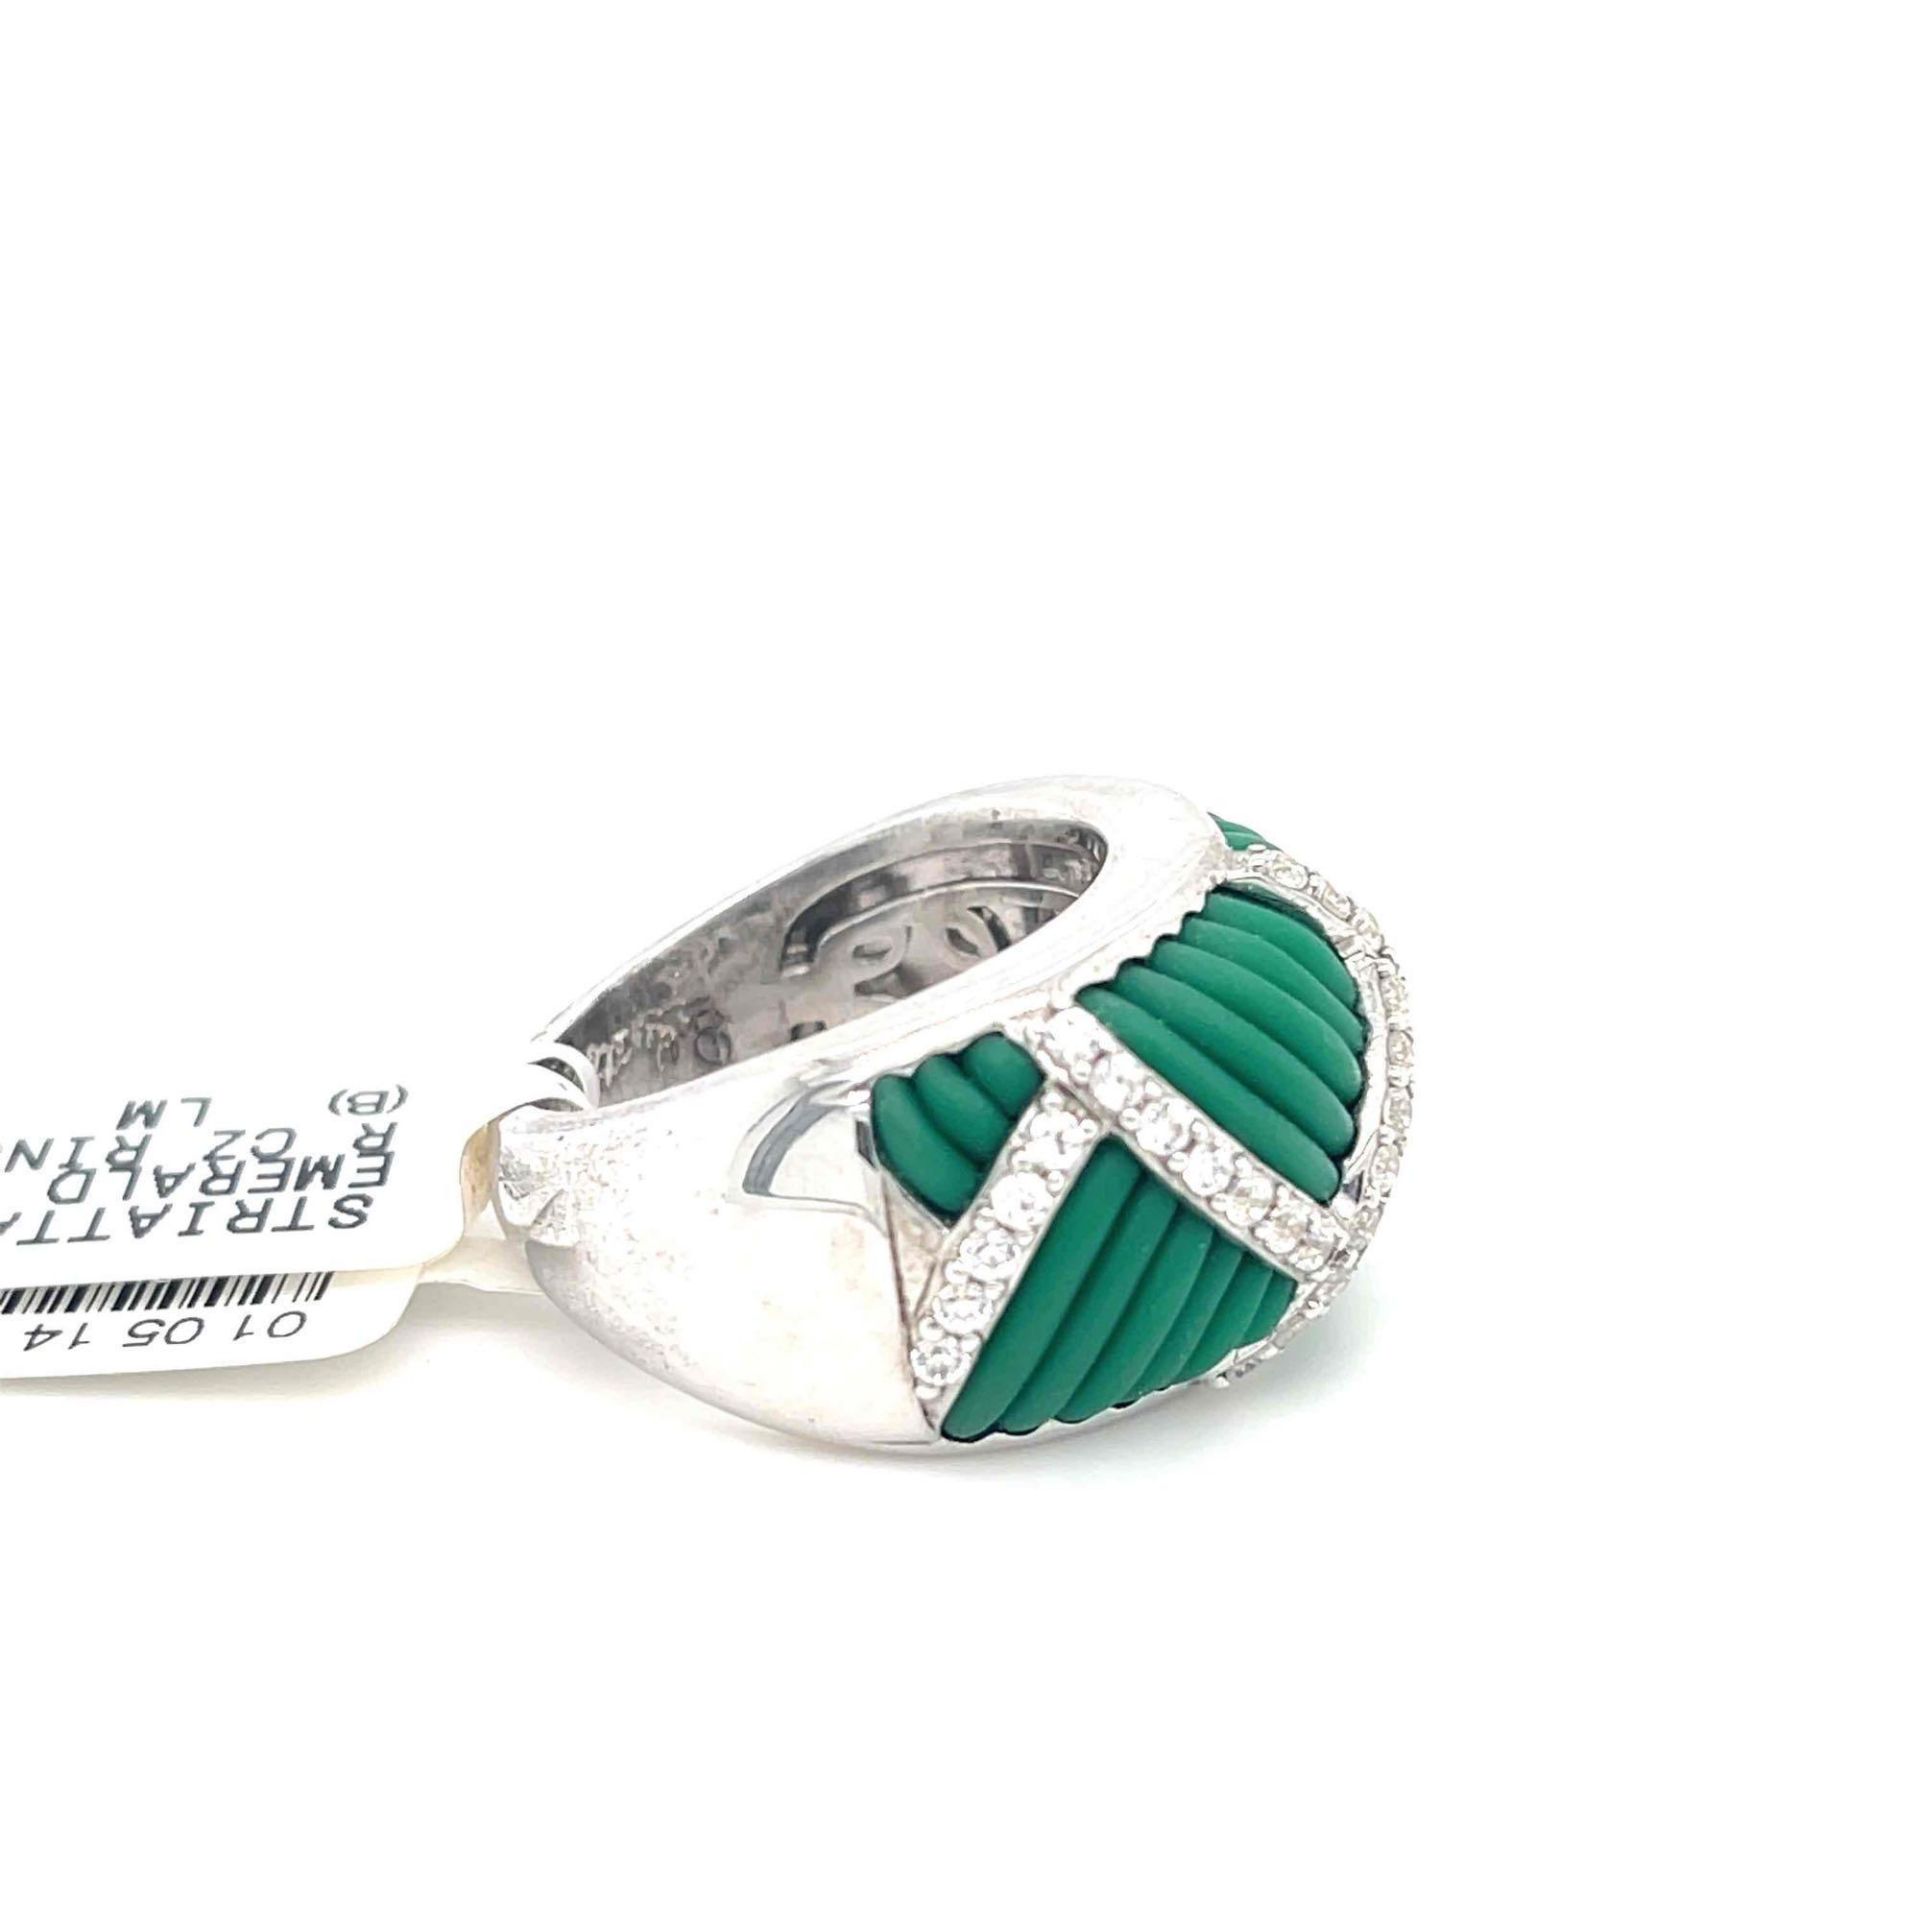 BELLE ETOILE STERLING SILVER STRIATTA GREEN RUBBER RING AND EARRING - Image 2 of 5